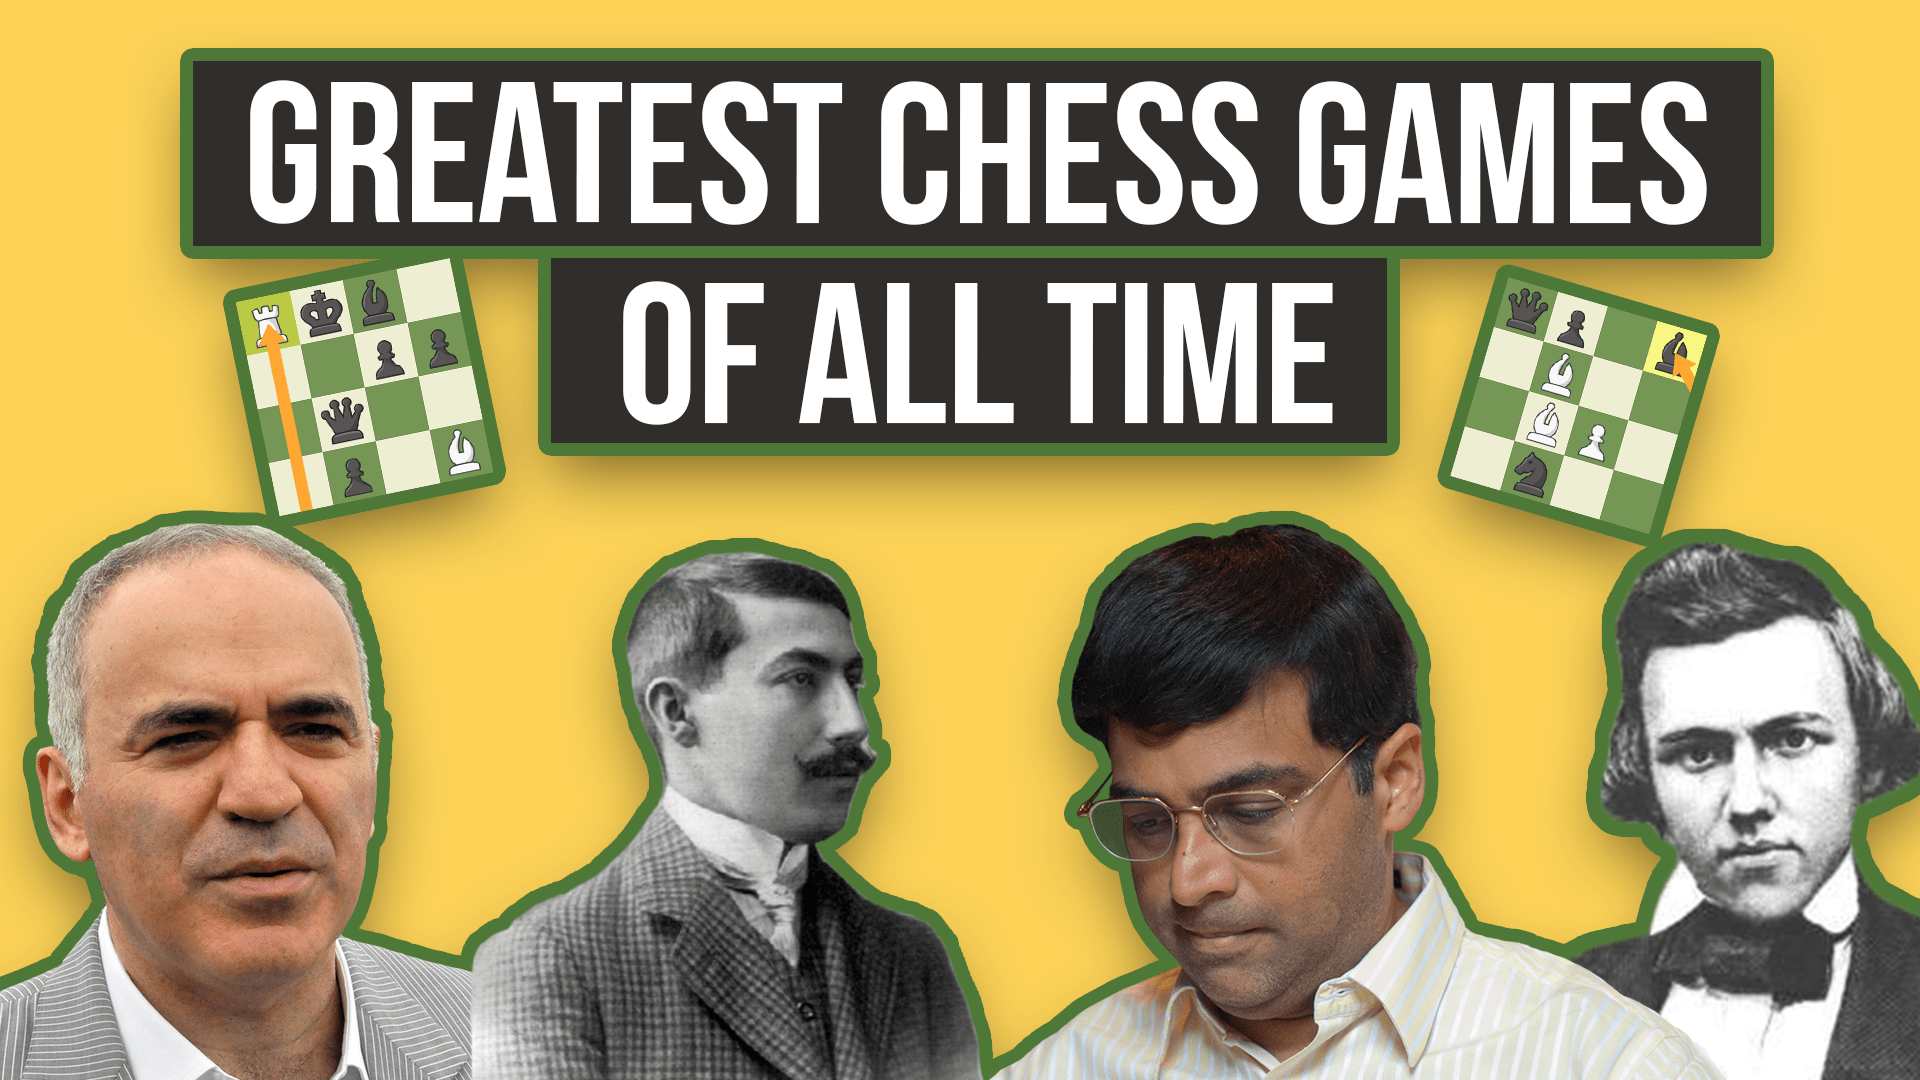 The best chess games of Anatoly Karpov 